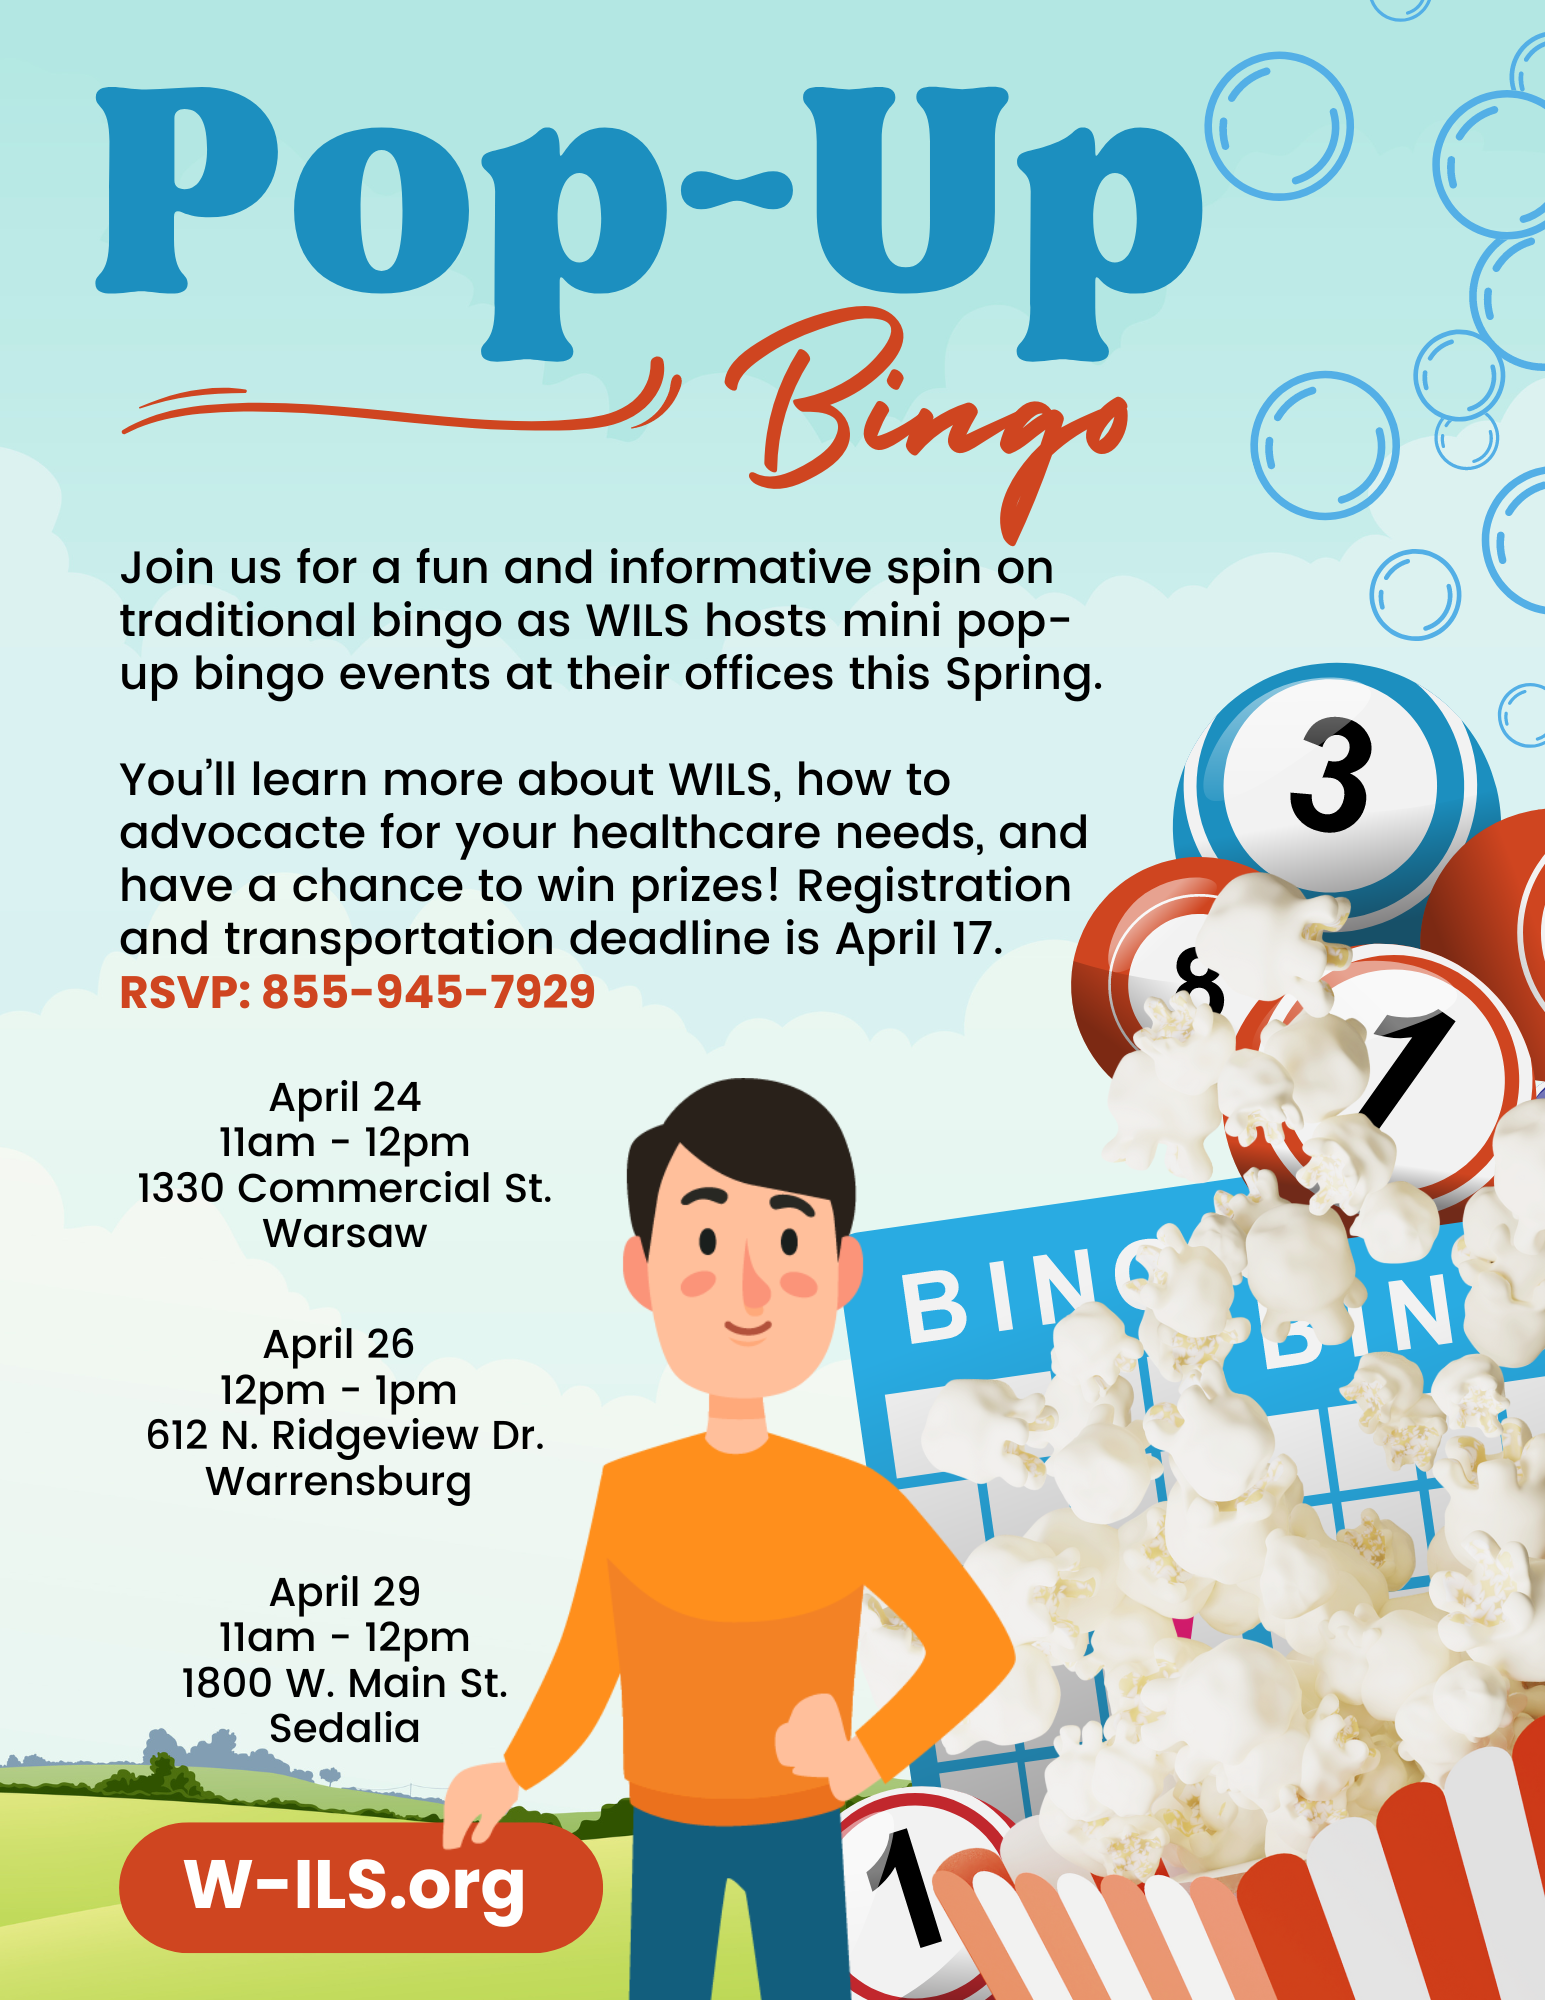 Pop-Up Bingo. Join us for a fun and informative spin on traditional bingo as WILS hosts mini pop-up bingo events at their offices this Spring. You’ll learn more about WILS, how to advocacte for your healthcare needs, and have a chance to win prizes! Registration and transportation deadline is April 17. RSVP 855-945-7929.